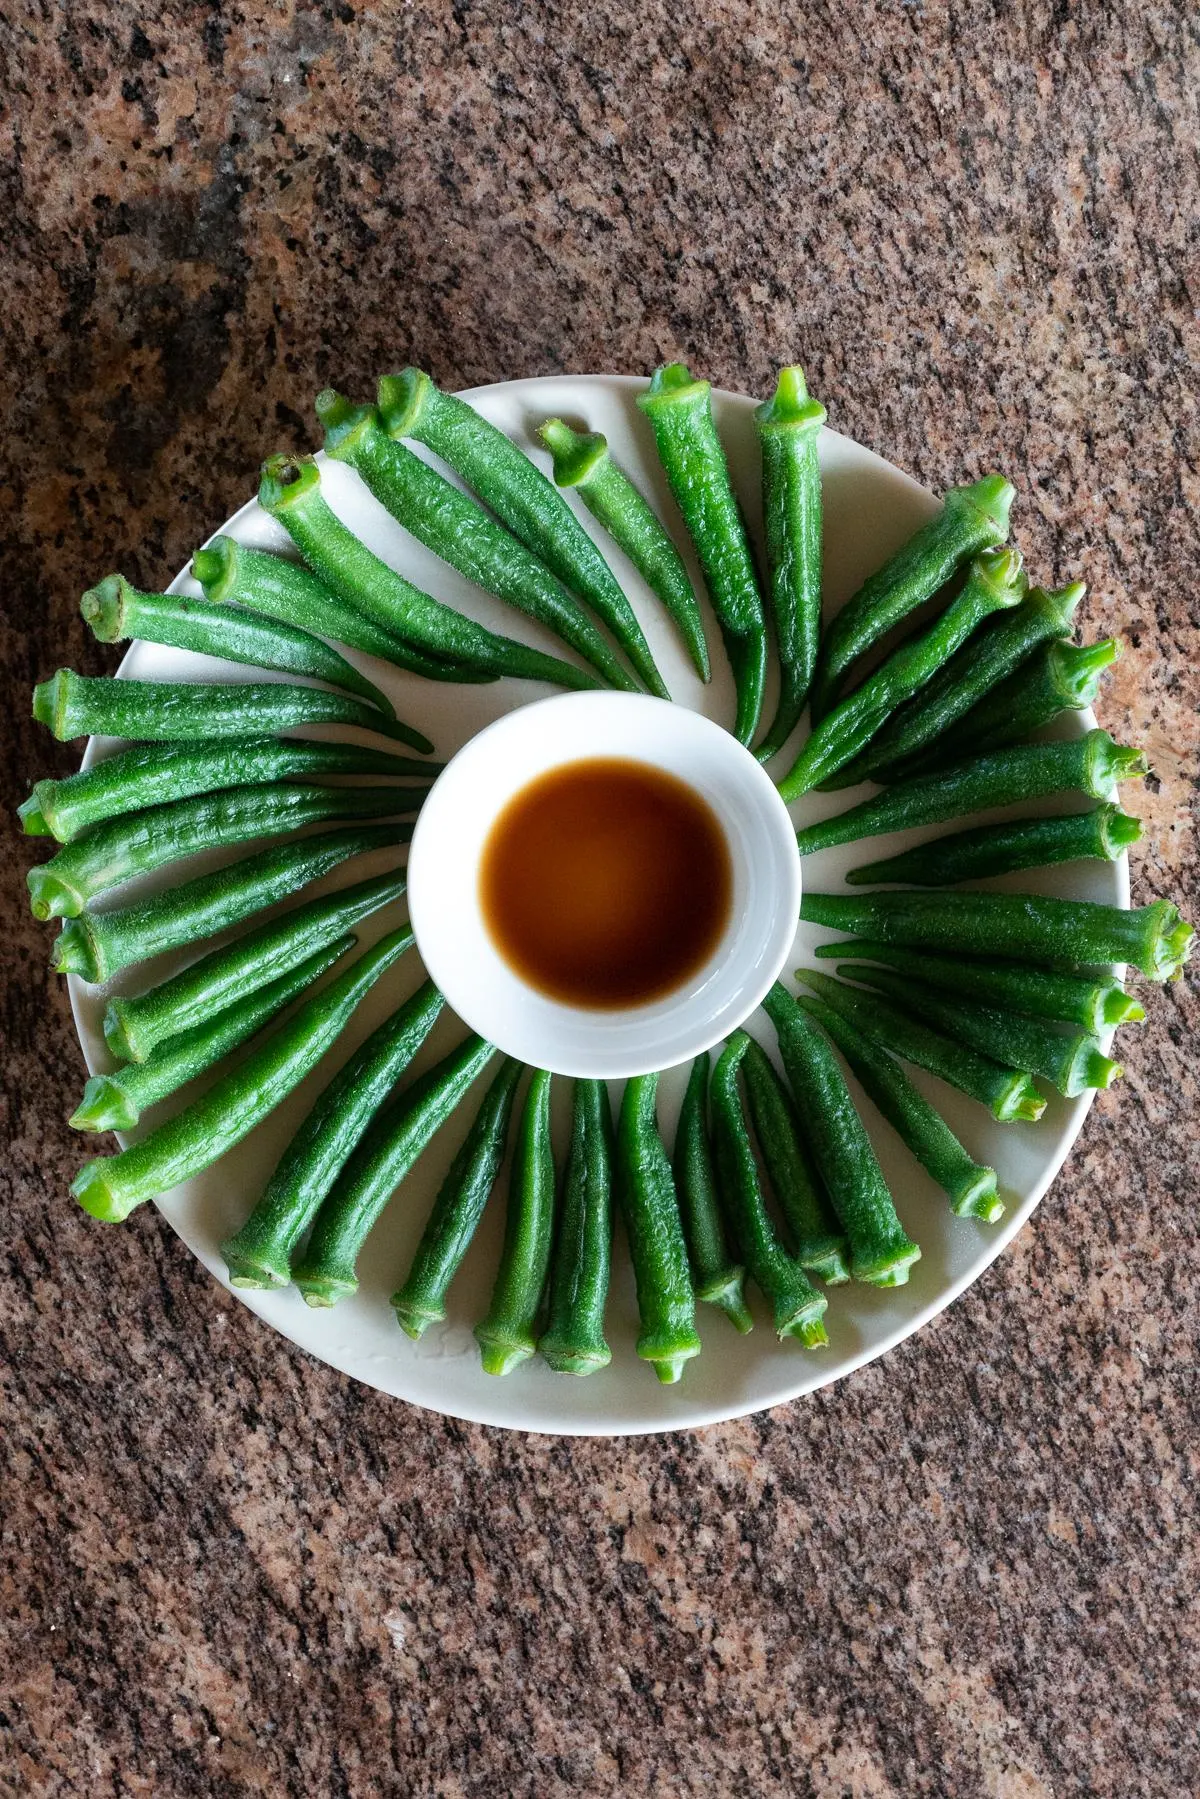 A plate of boiled okra with a small dish of soy sauce for dipping.